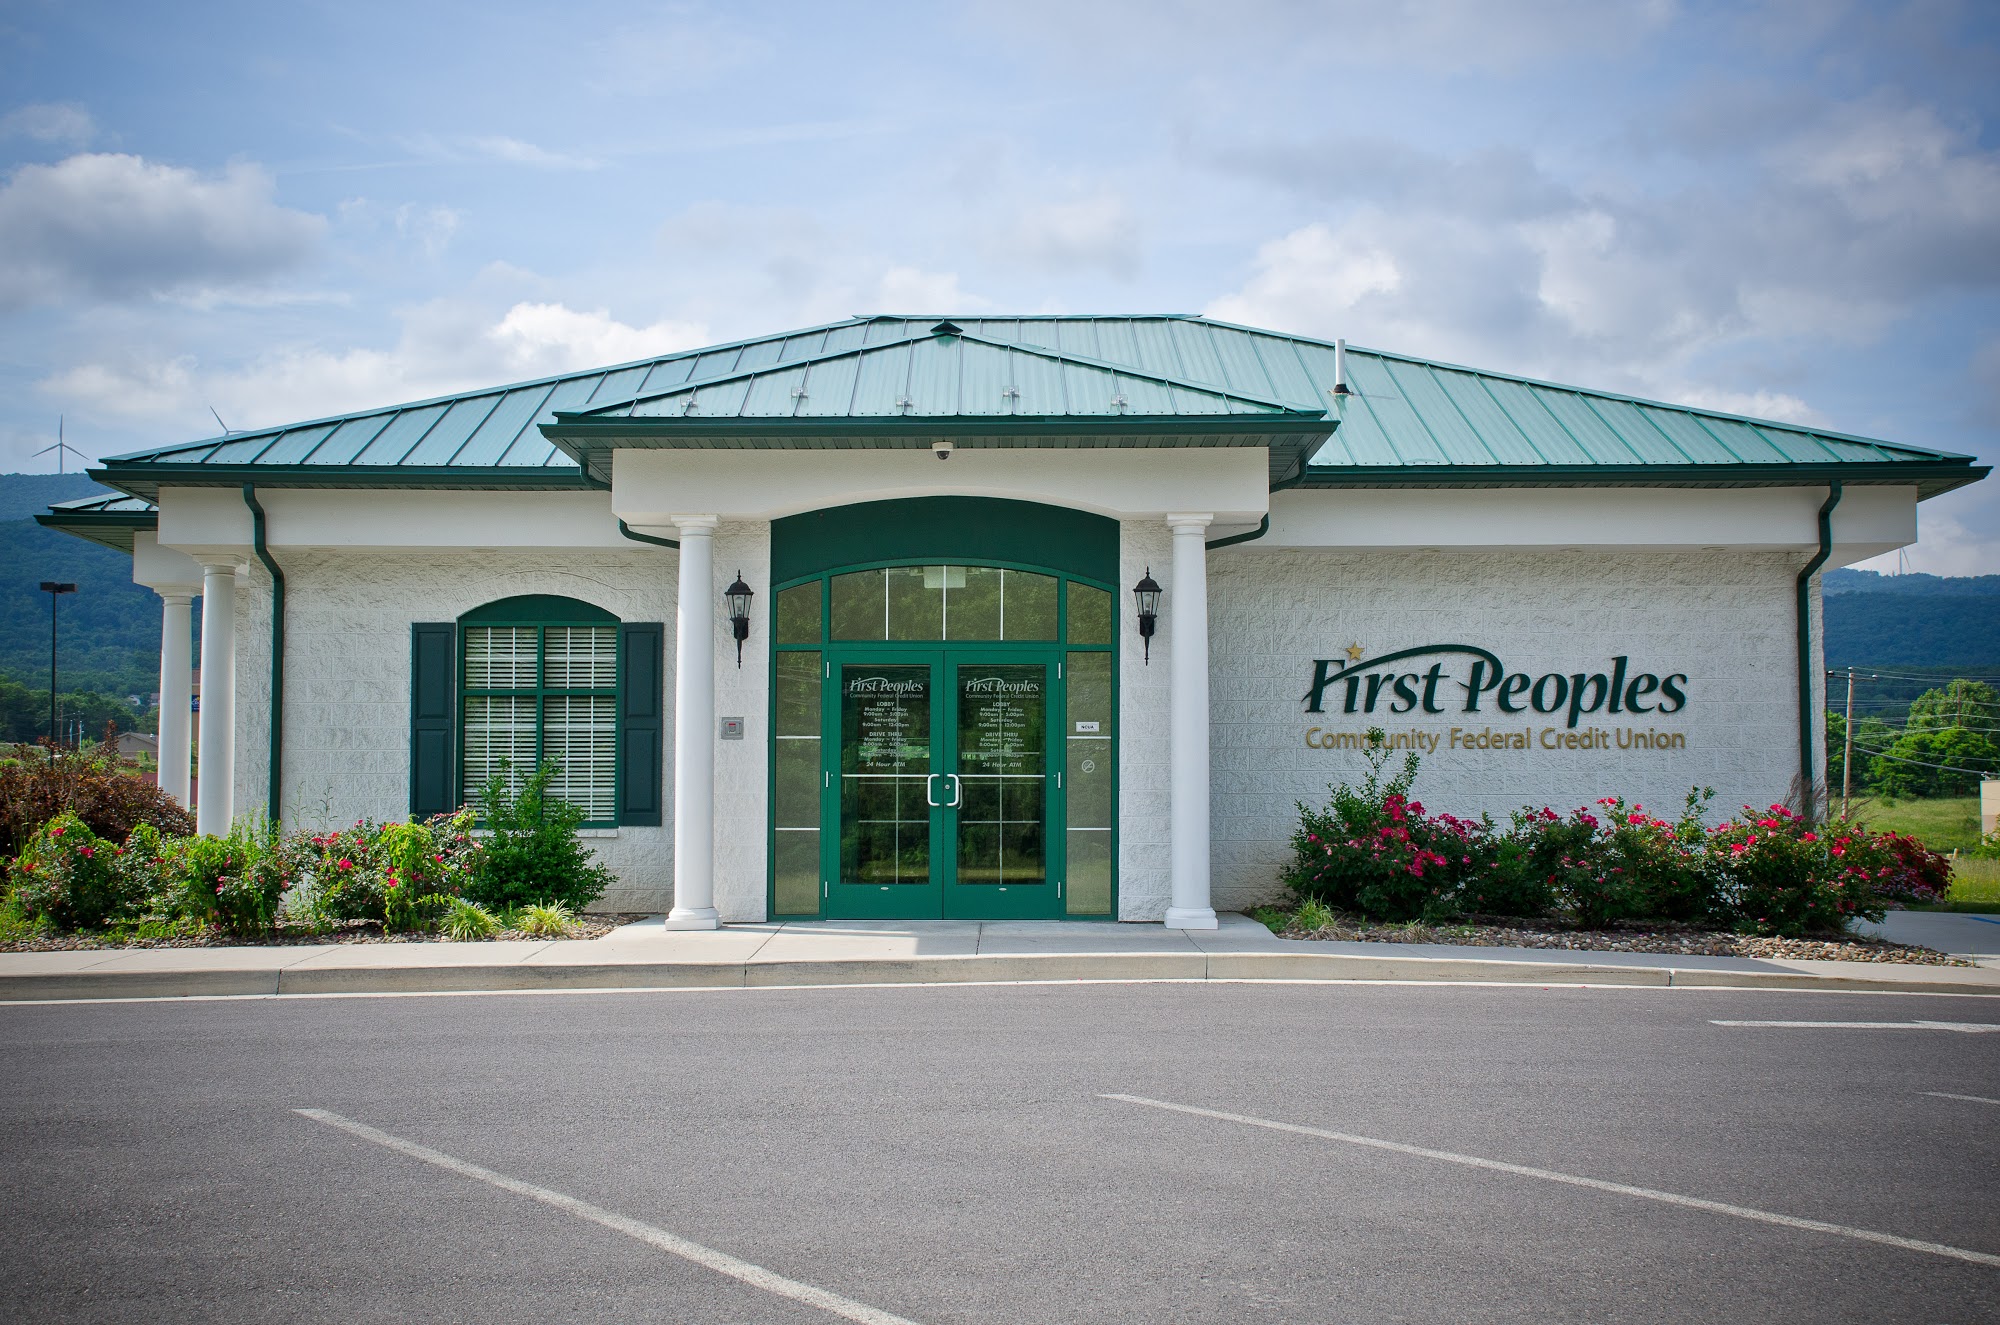 First Peoples Community Federal Credit Union